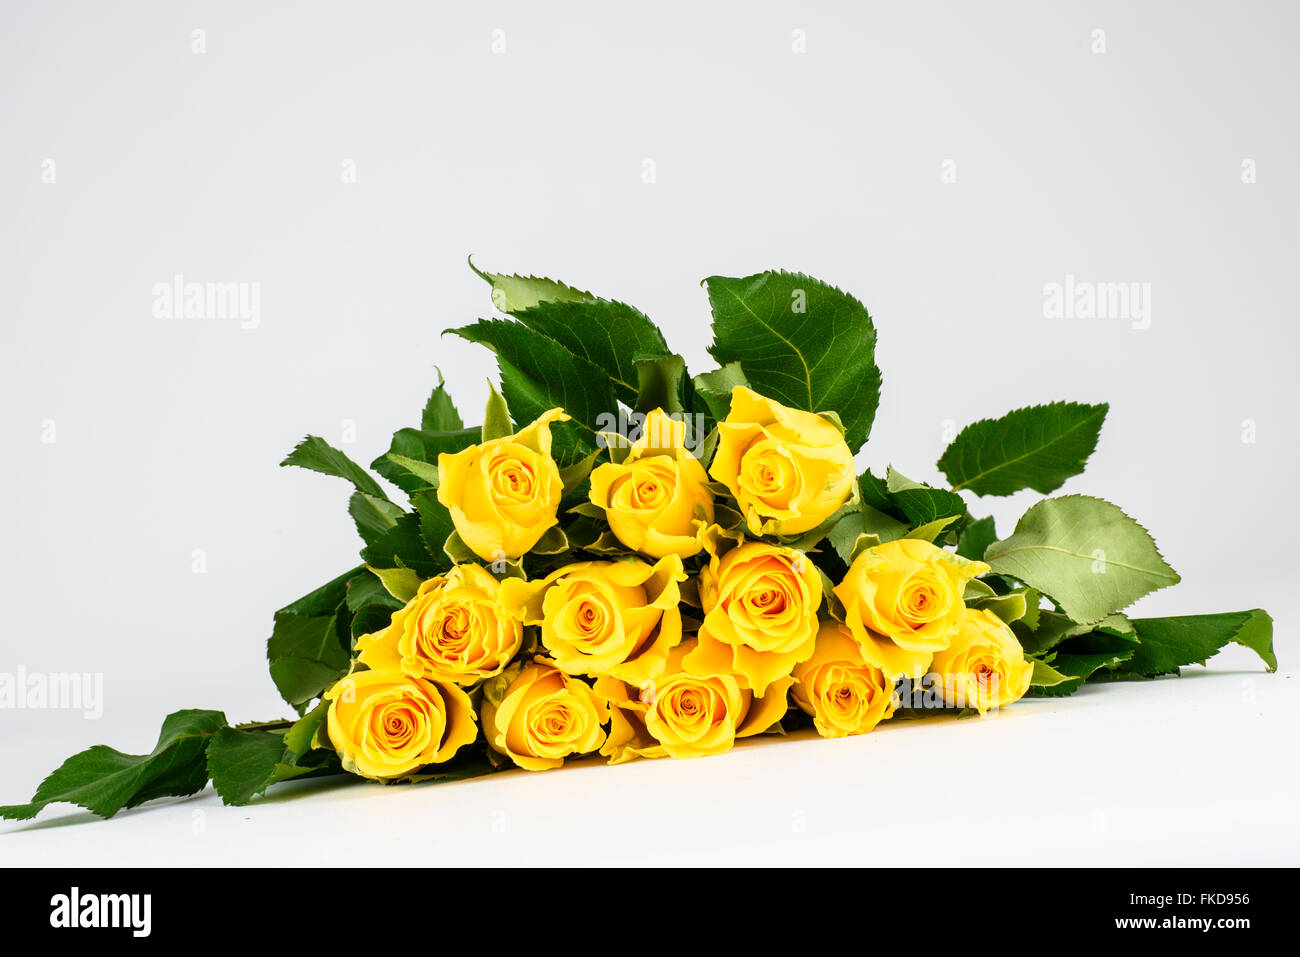 Bunch of fresh yellow roses lying flat on a white surface Stock Photo